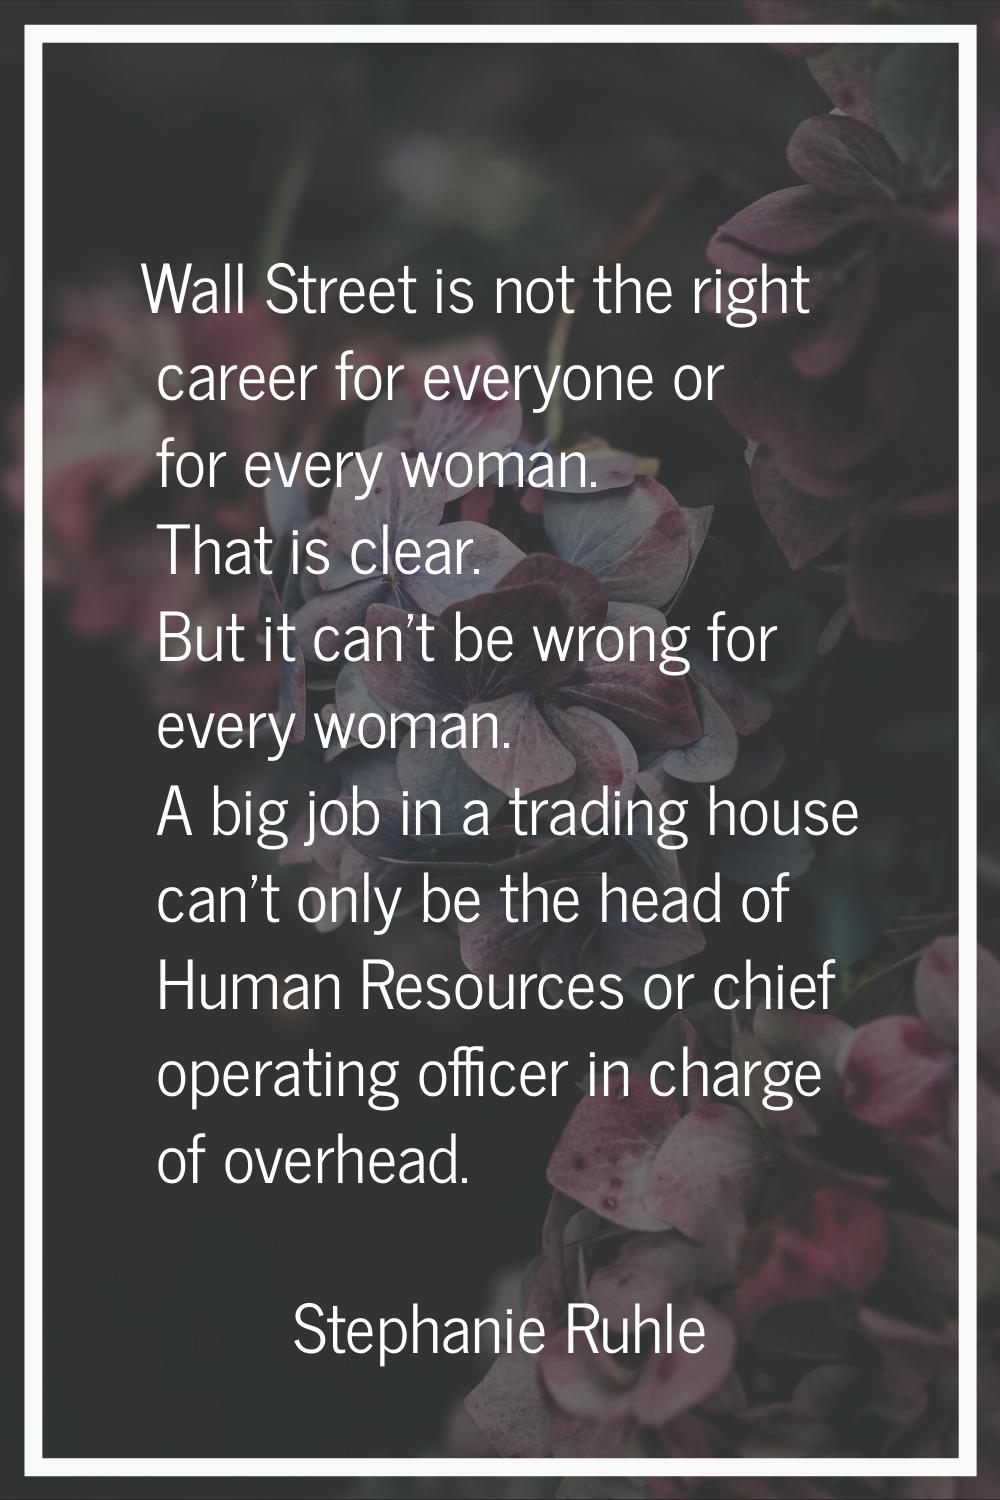 Wall Street is not the right career for everyone or for every woman. That is clear. But it can't be